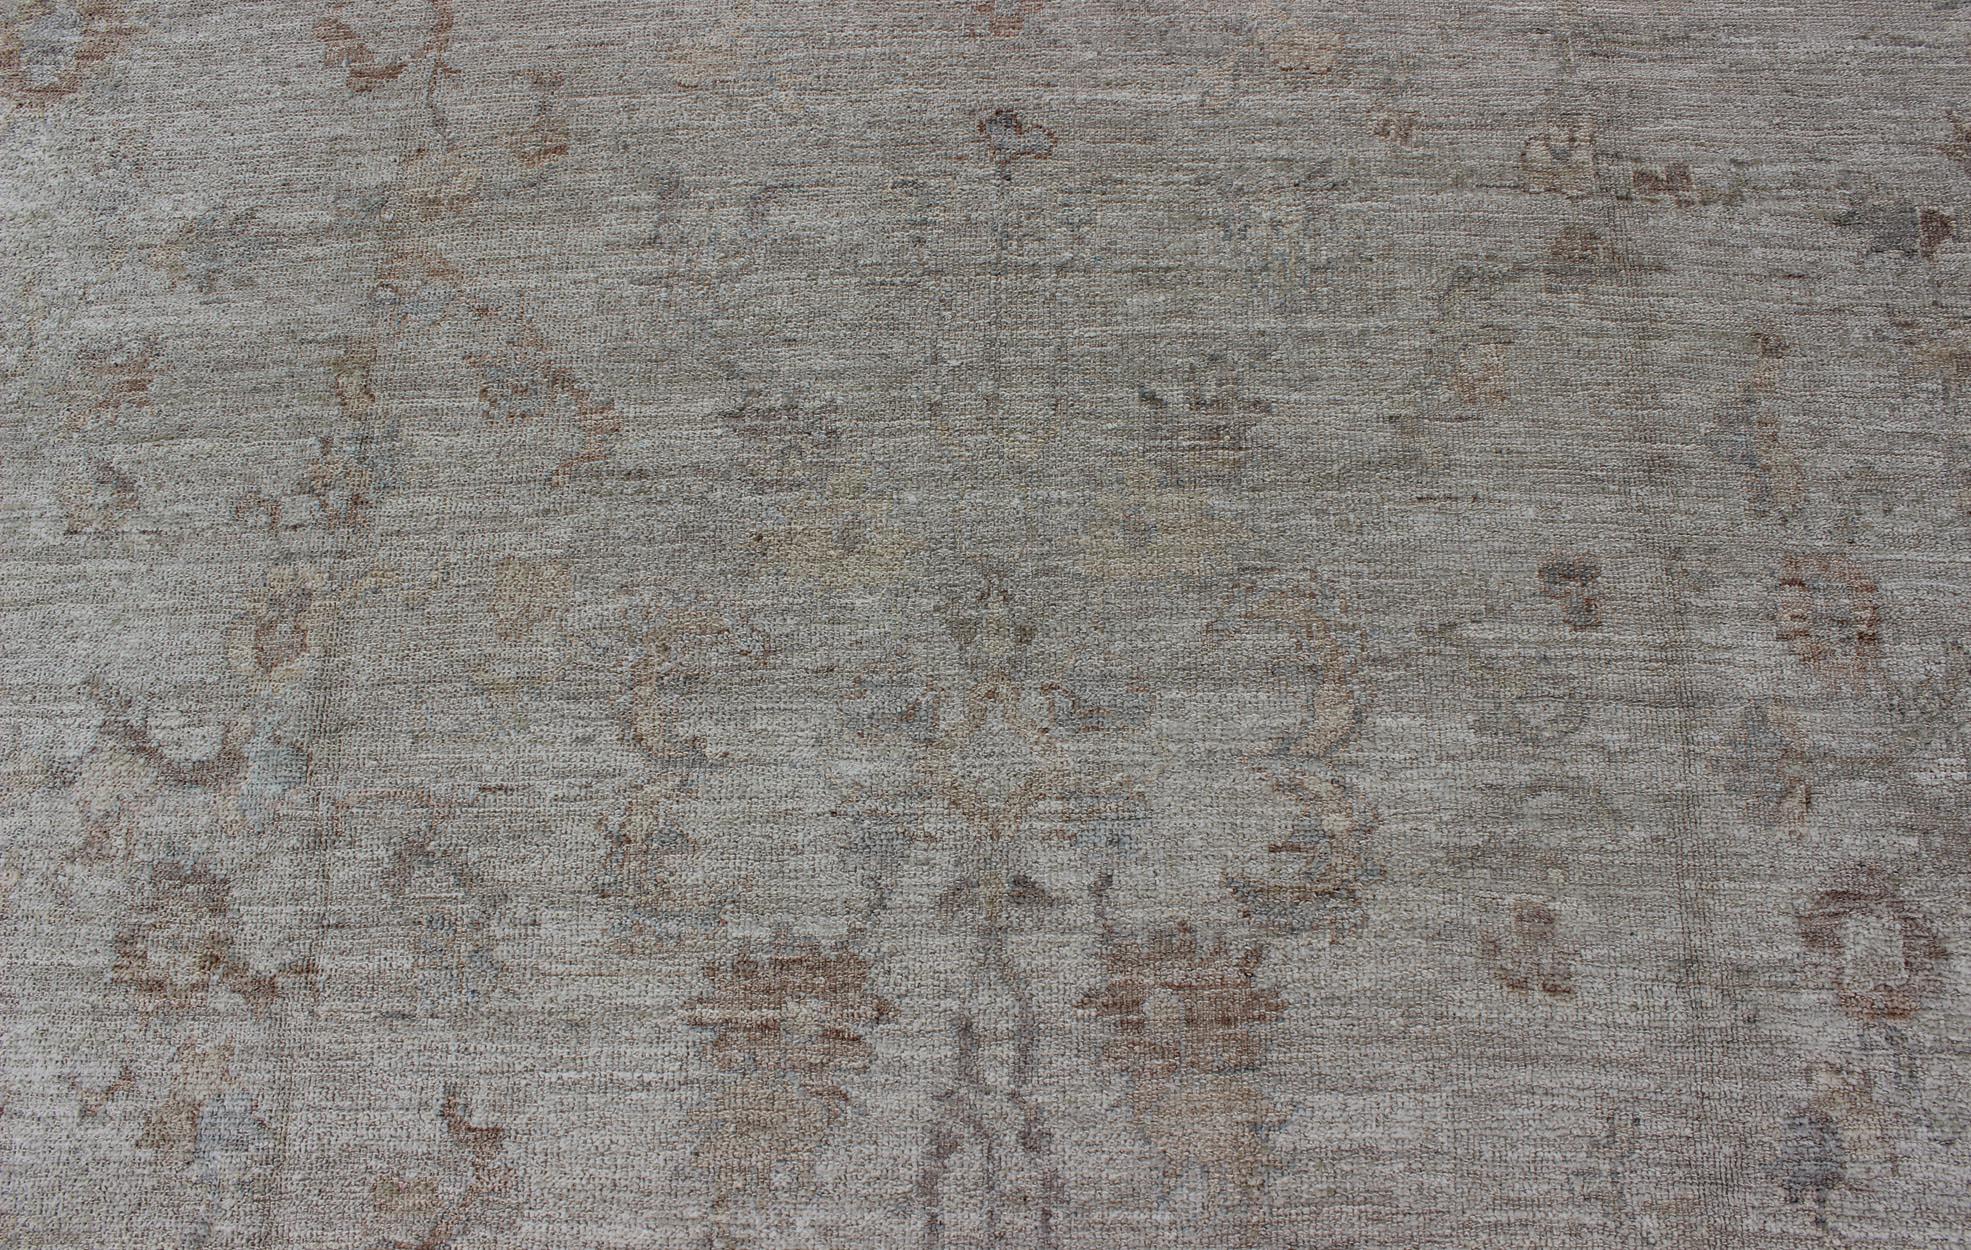 Large Angora Oushak Turkish Rug in Cream, Taupe, Silver, and Hints of Faded Blue For Sale 3